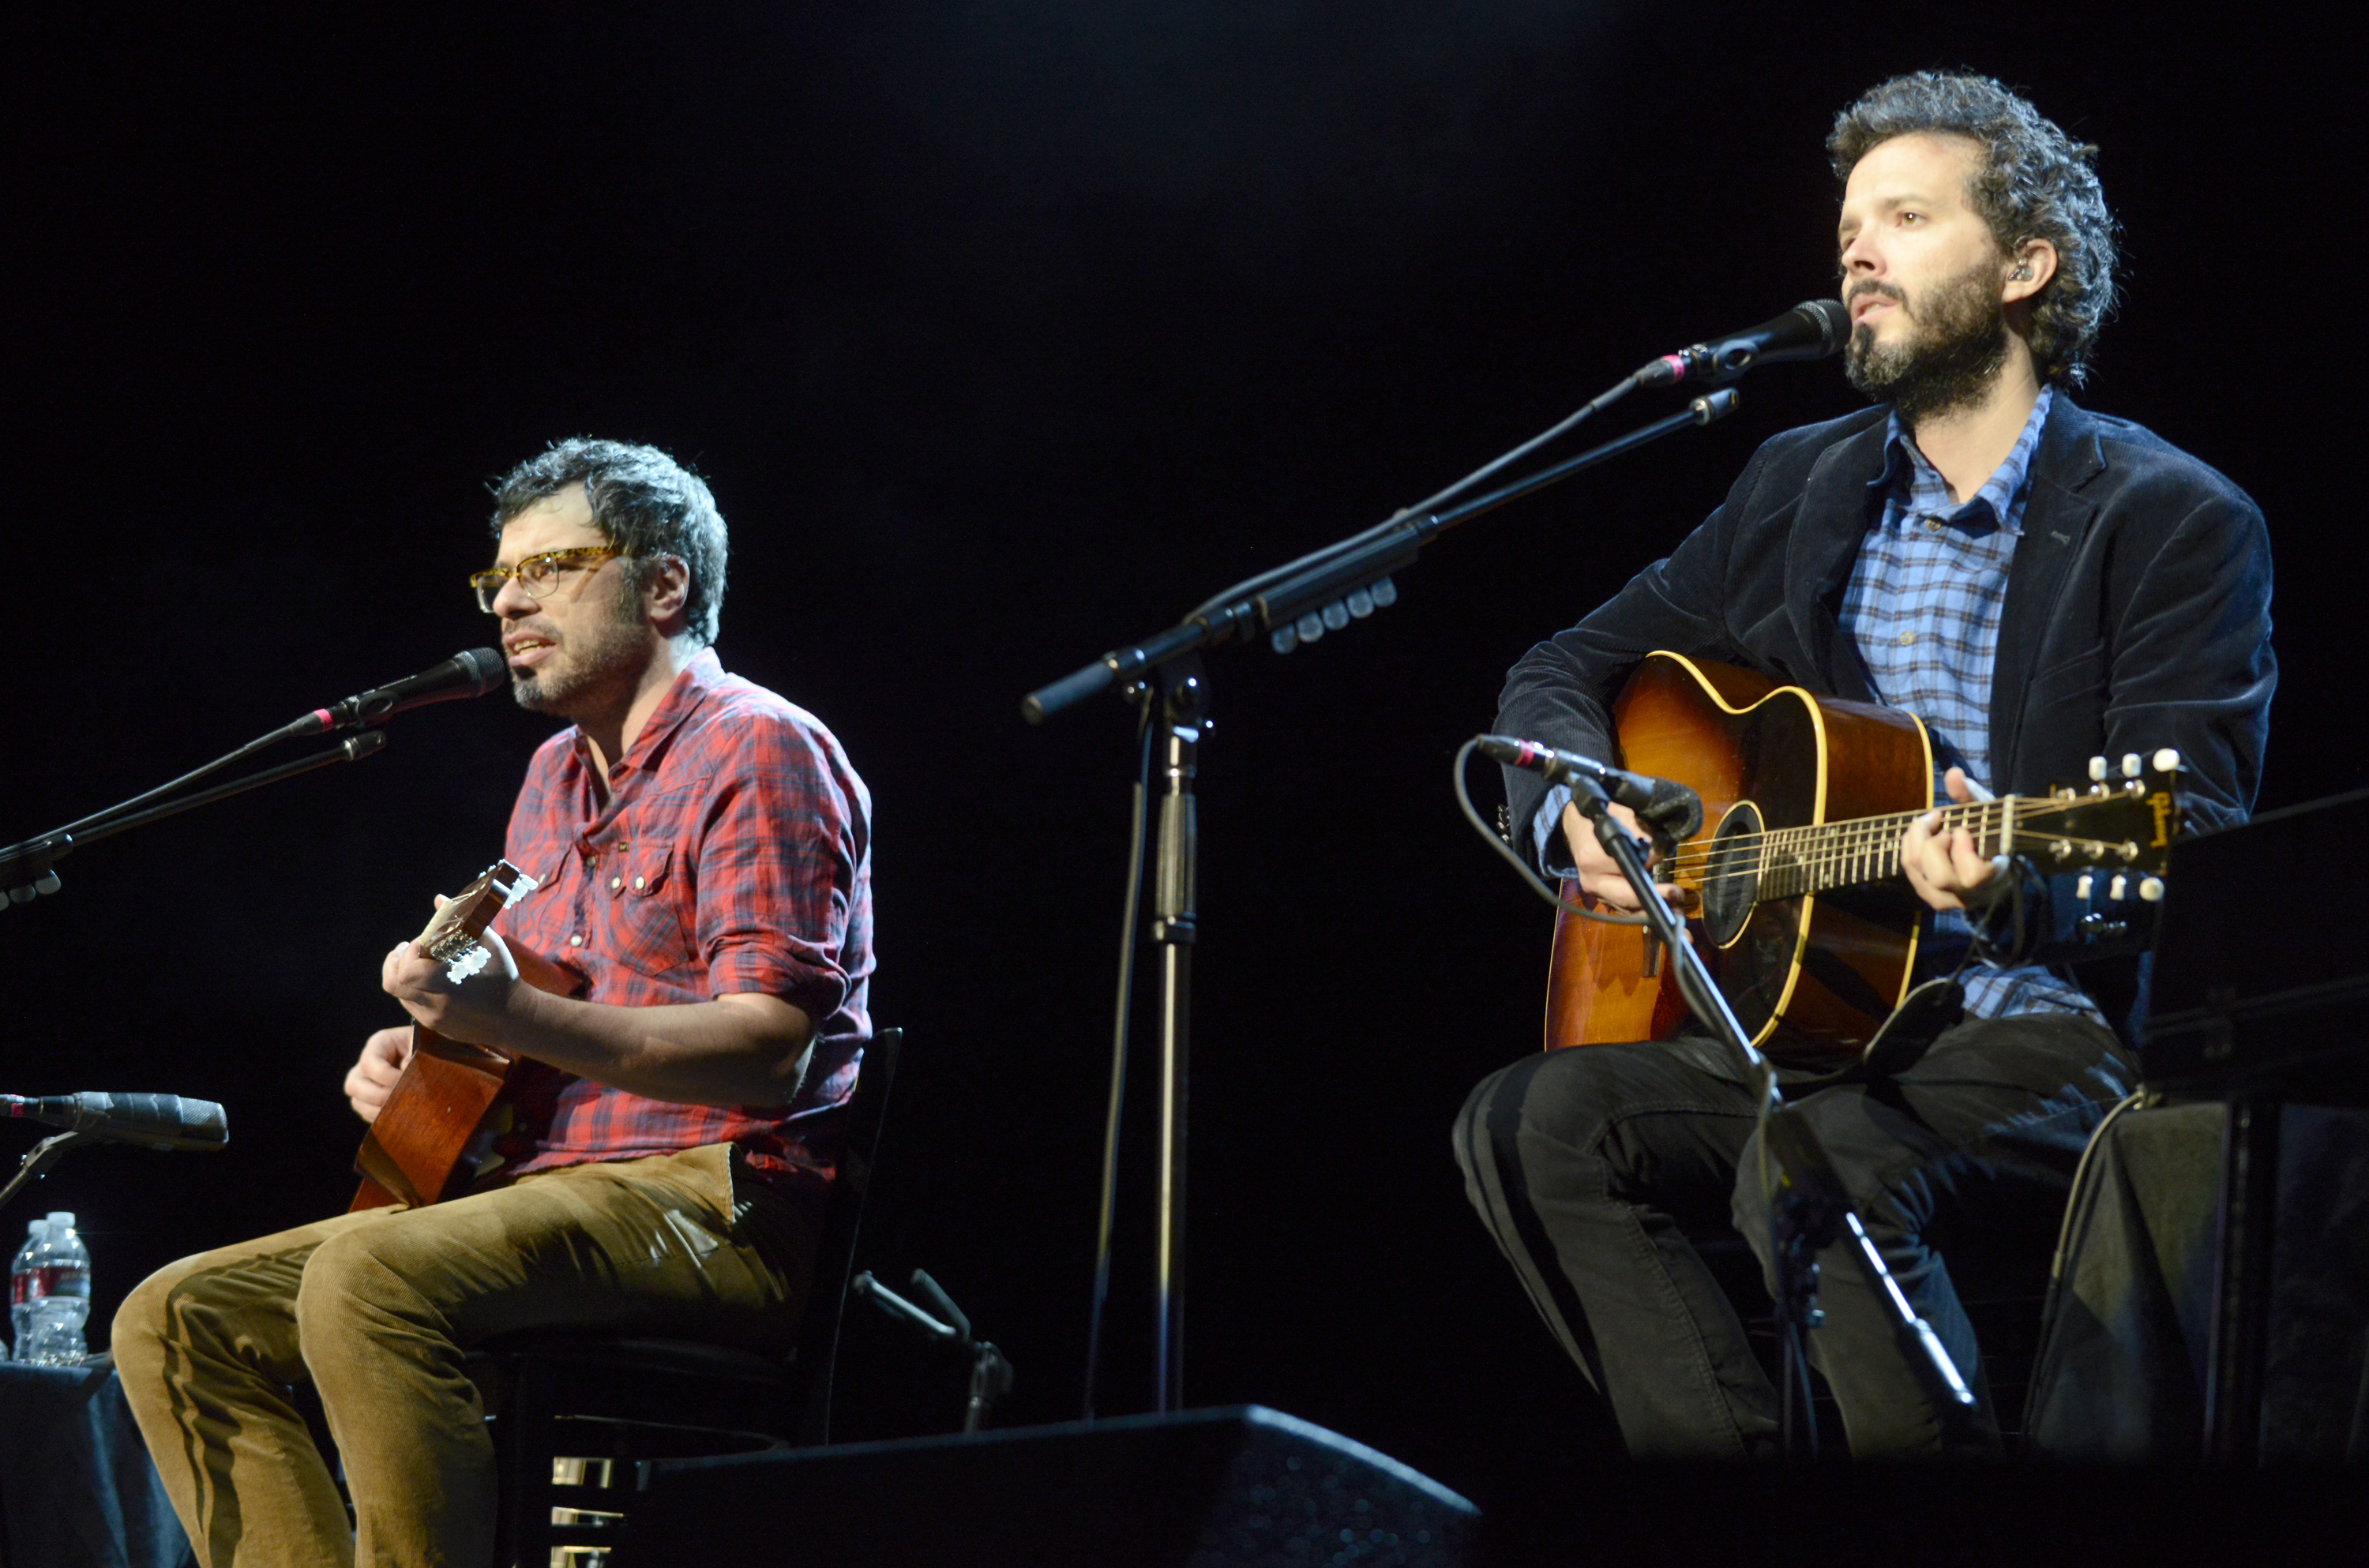 Flight of the Conchords - "Father and Son"